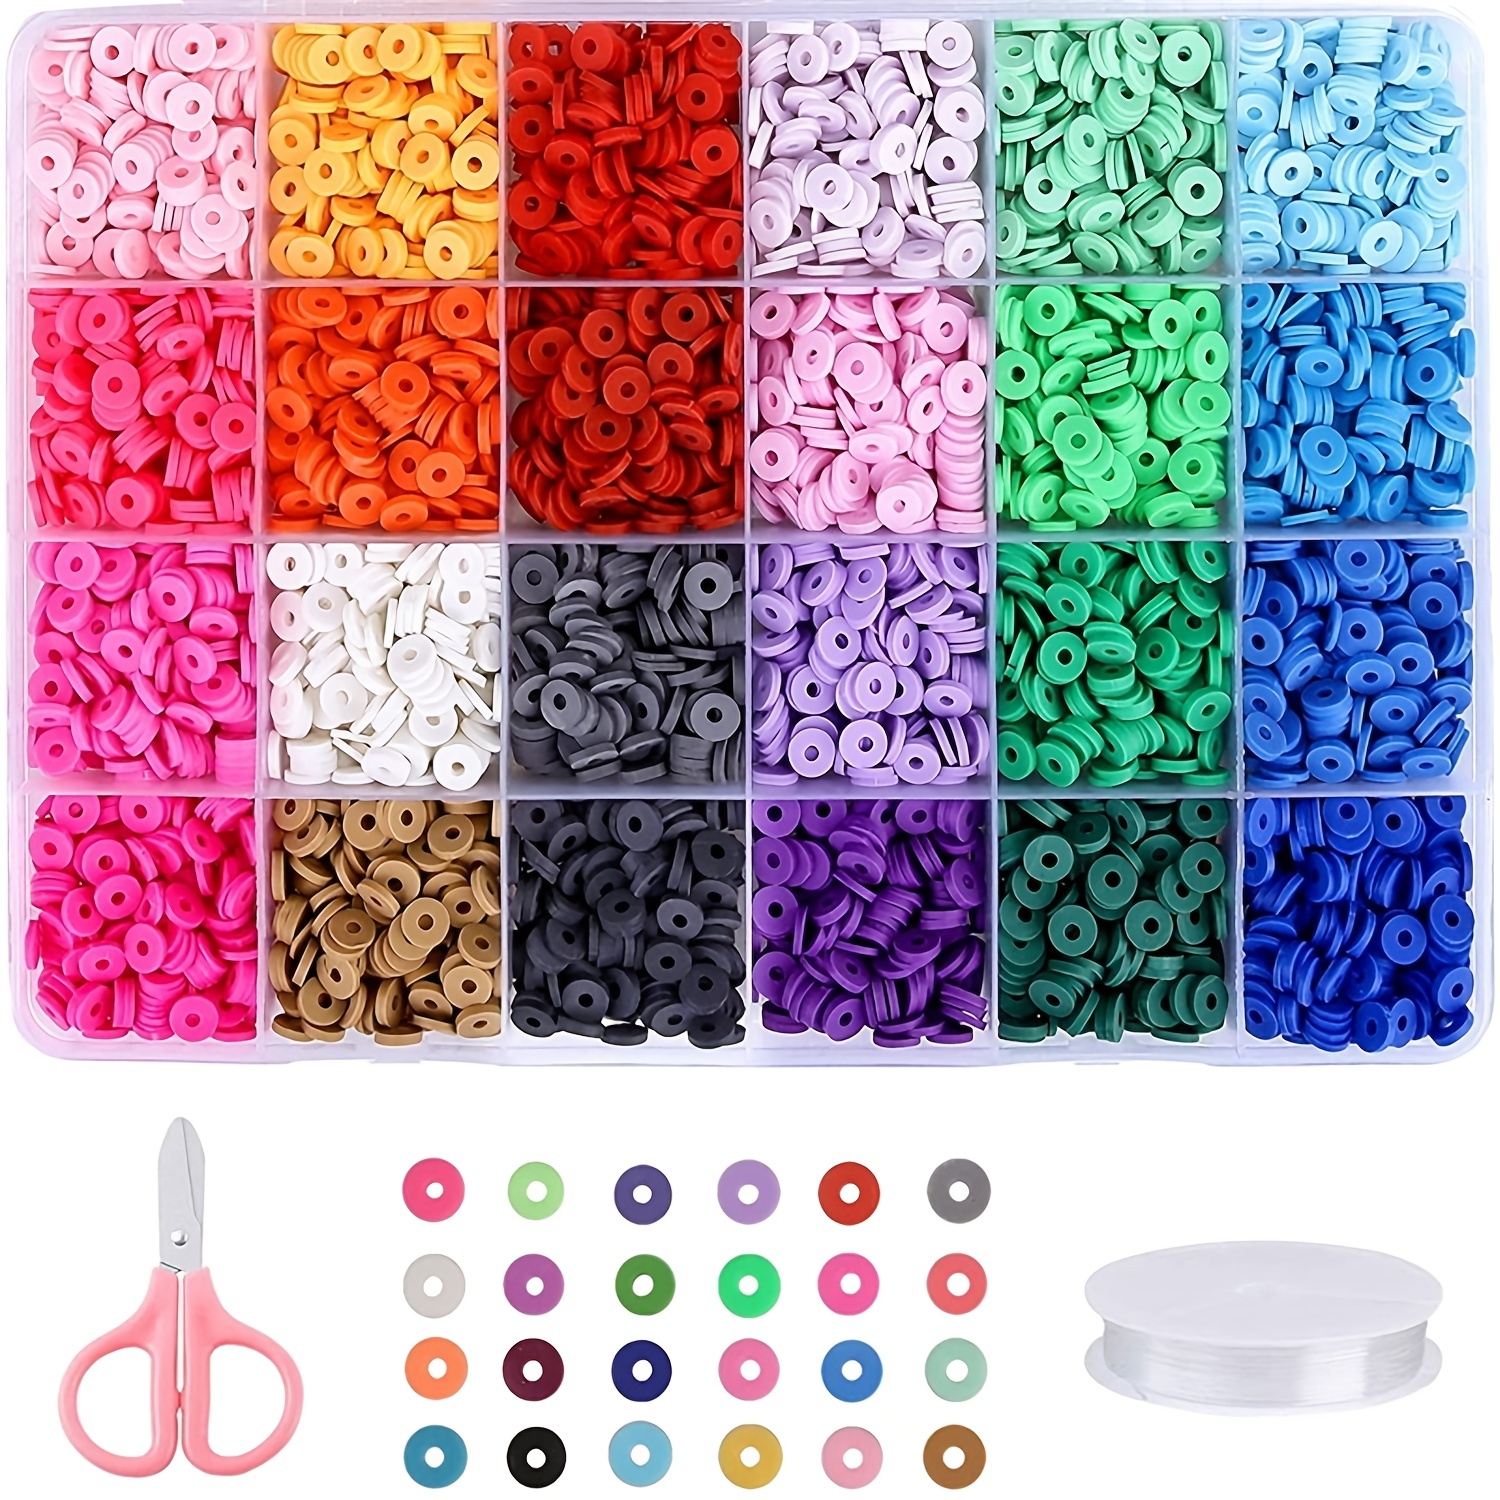 2 Boxes Of 6480pcs Clay Beads Set For Making Bracelets, Fruit And Flower  Smiling Face Polymer Clay Bead Pendants With 24 Colors Of Flat Round Stone